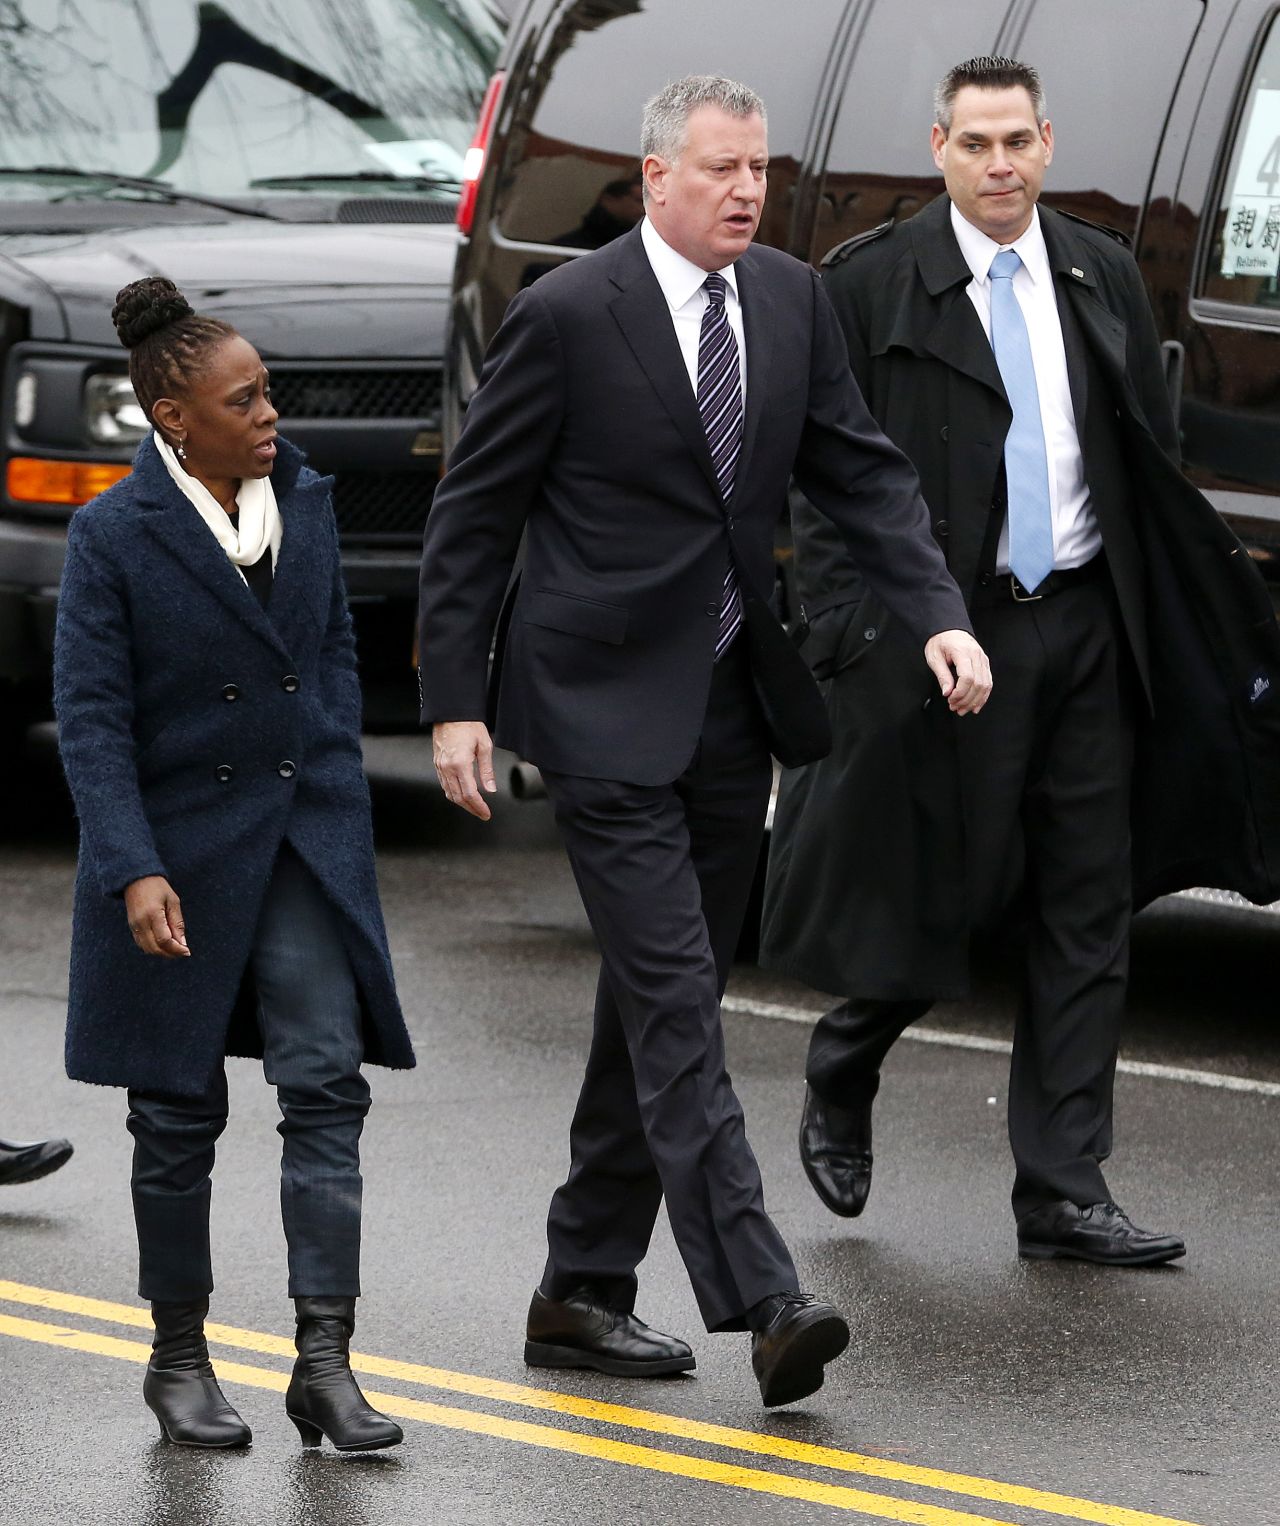 New York City Mayor Bill de Blasio, center, walks with his wife, Chirlane McCray, while arriving for the funeral.